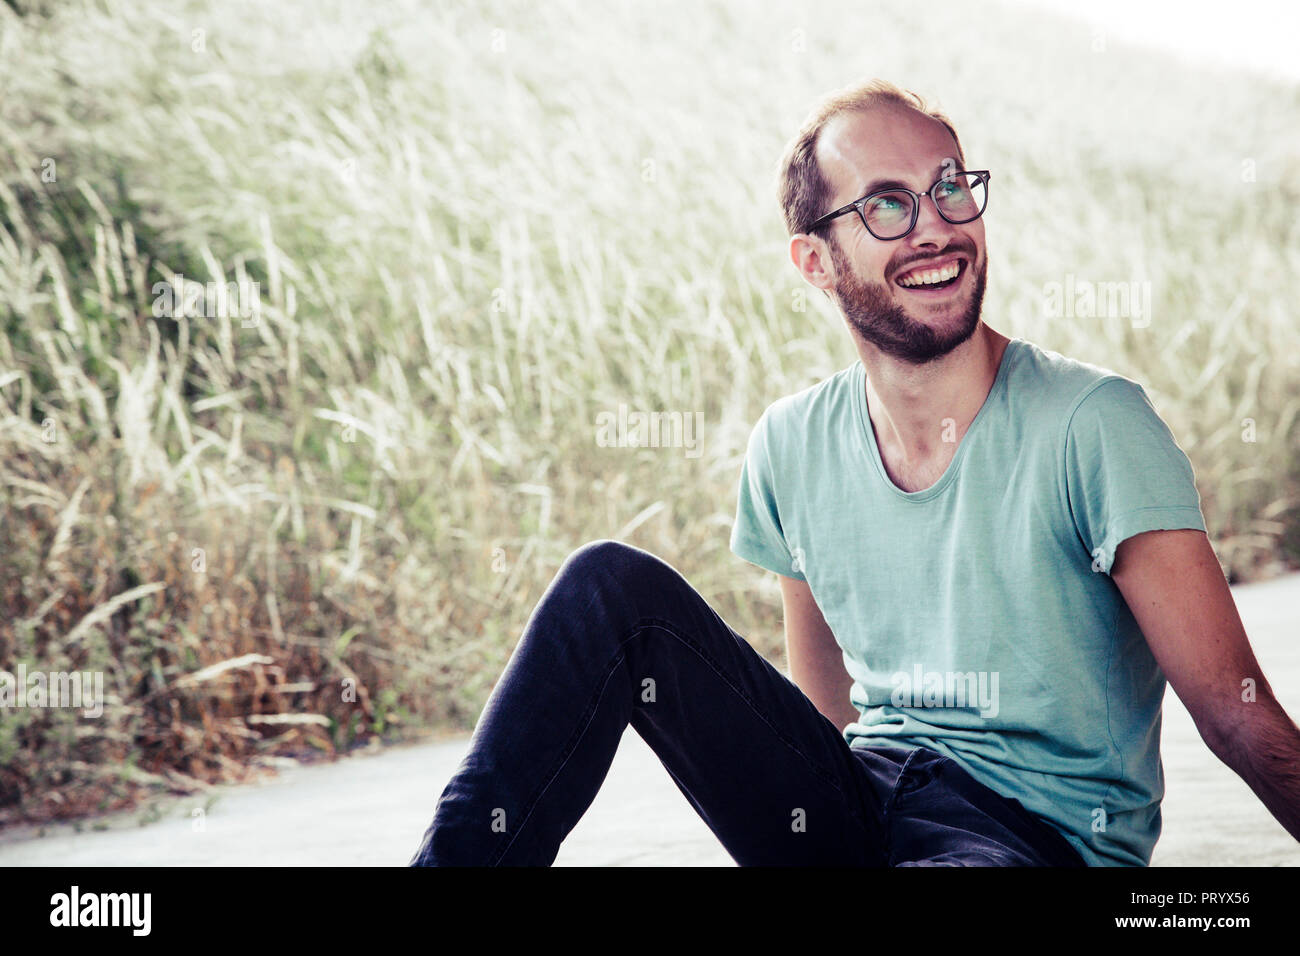 Portrait of laughing man outdoors Stock Photo